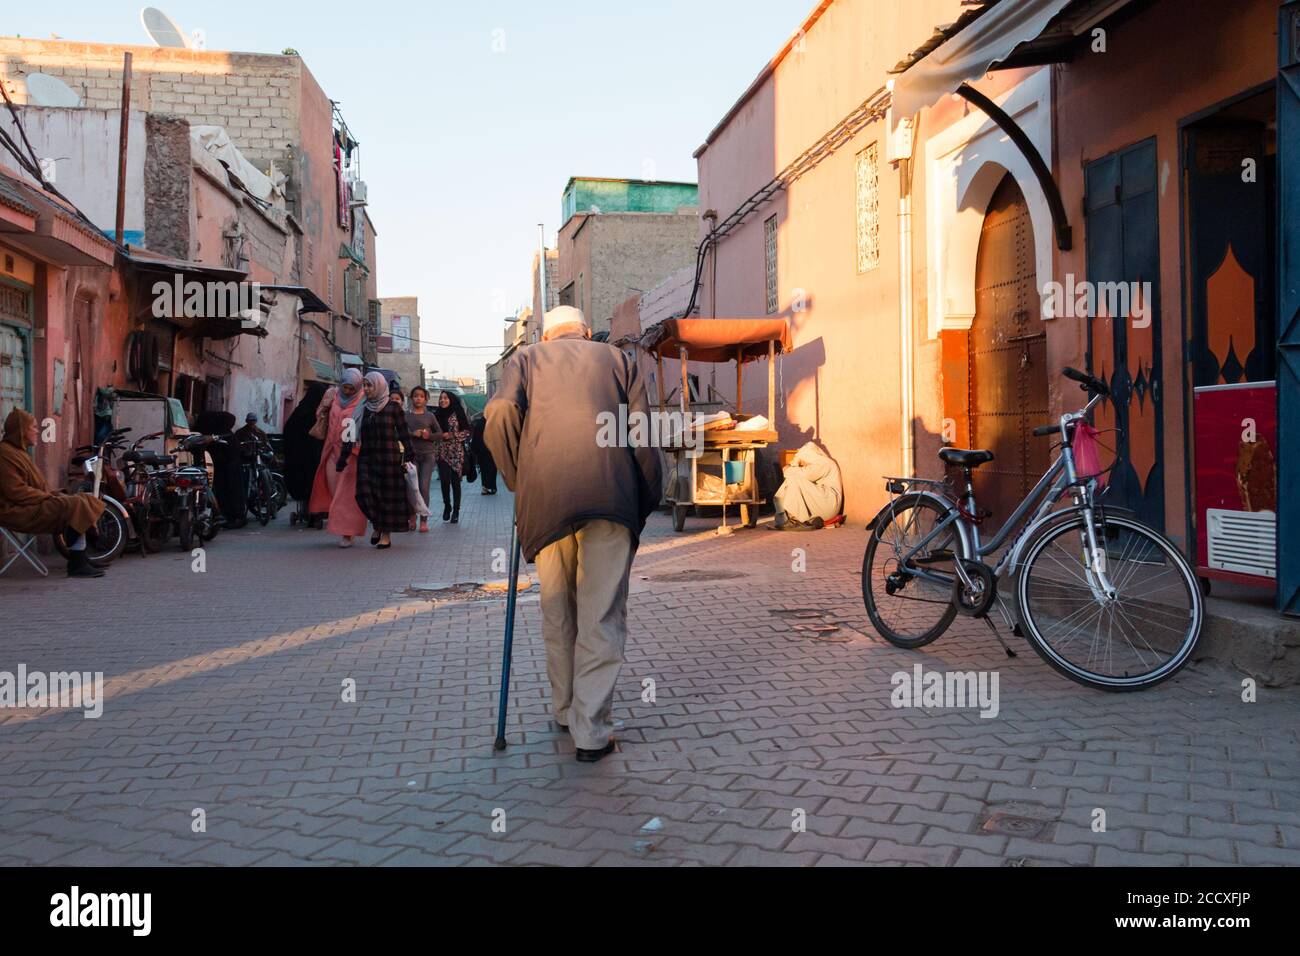 Marrakesh, Morocco - March 13, 2018: An older man walk hunched down the streets of the medina of Marrakech Stock Photo